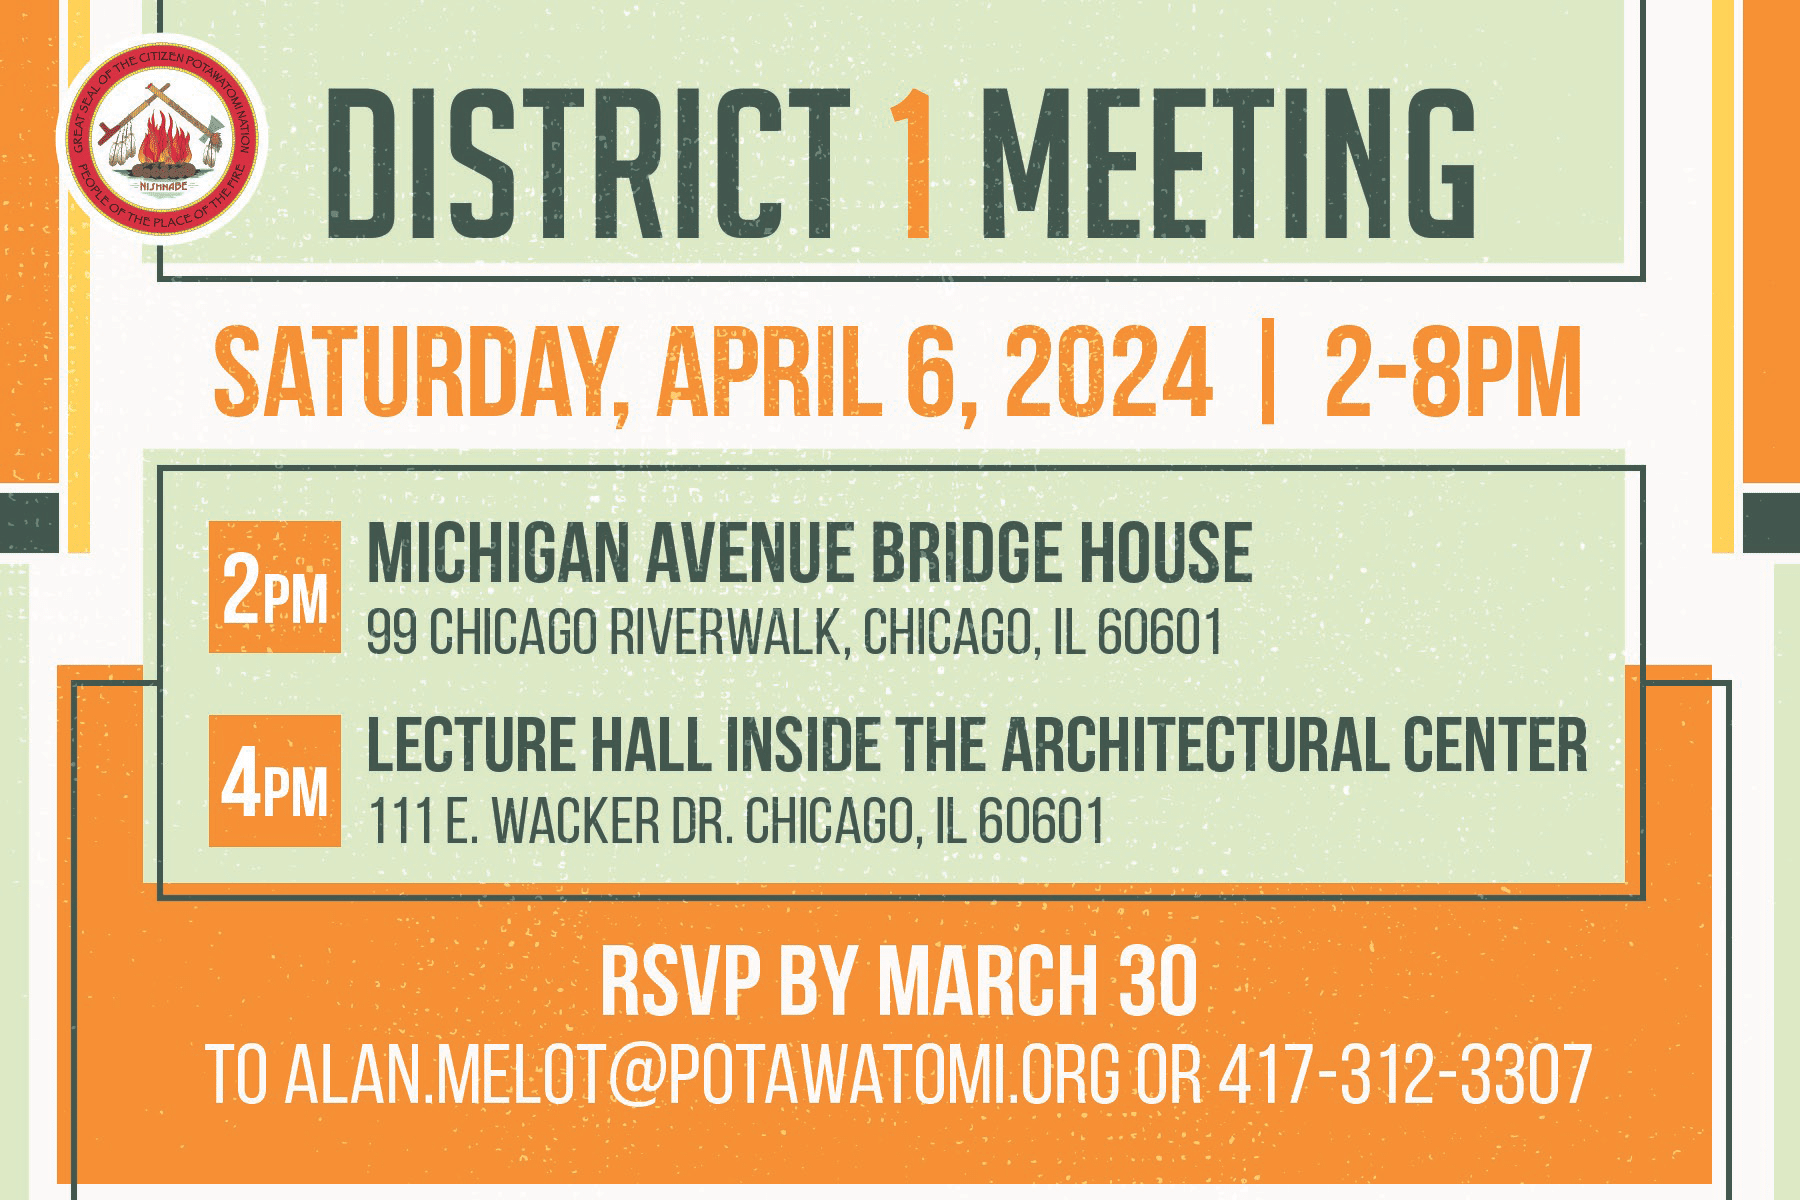 Orange and green color blocks with dark green text inviting Tribal members to a District 1 meeting on Saturday, April 6, 2024.